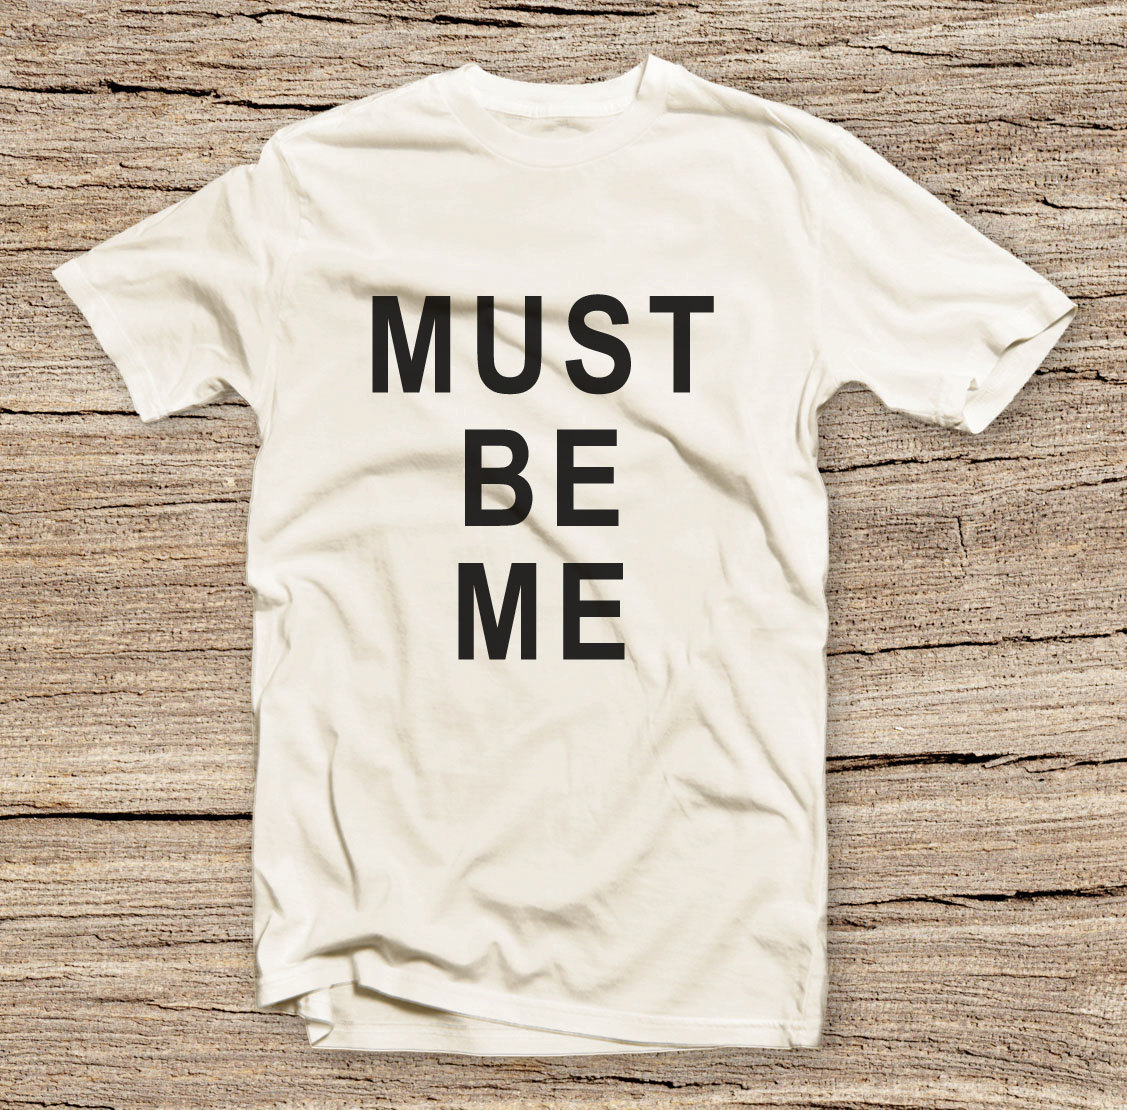 Pts-189 Must Be Me Style T-shirt, Fashion Printed T-shirt